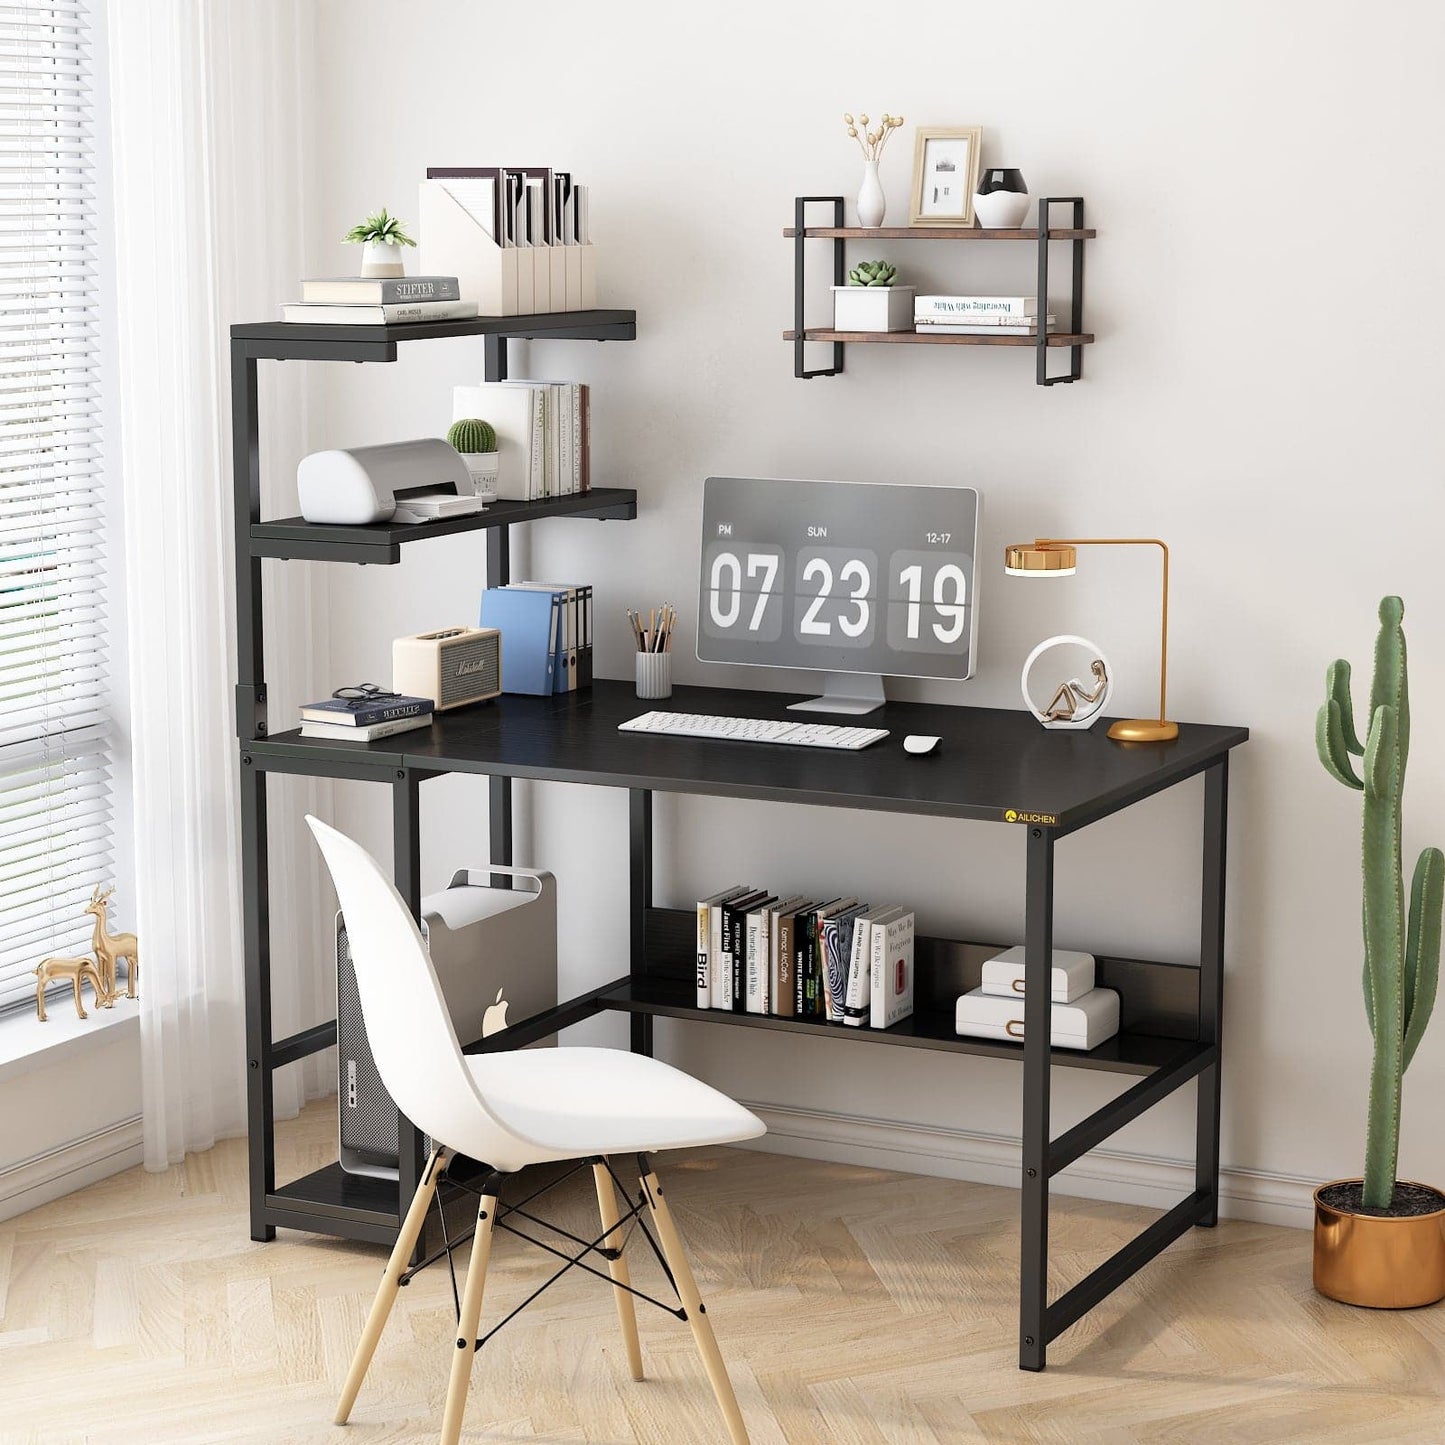 Modern Large Office Desk with Bookshelf and Tower Shelf